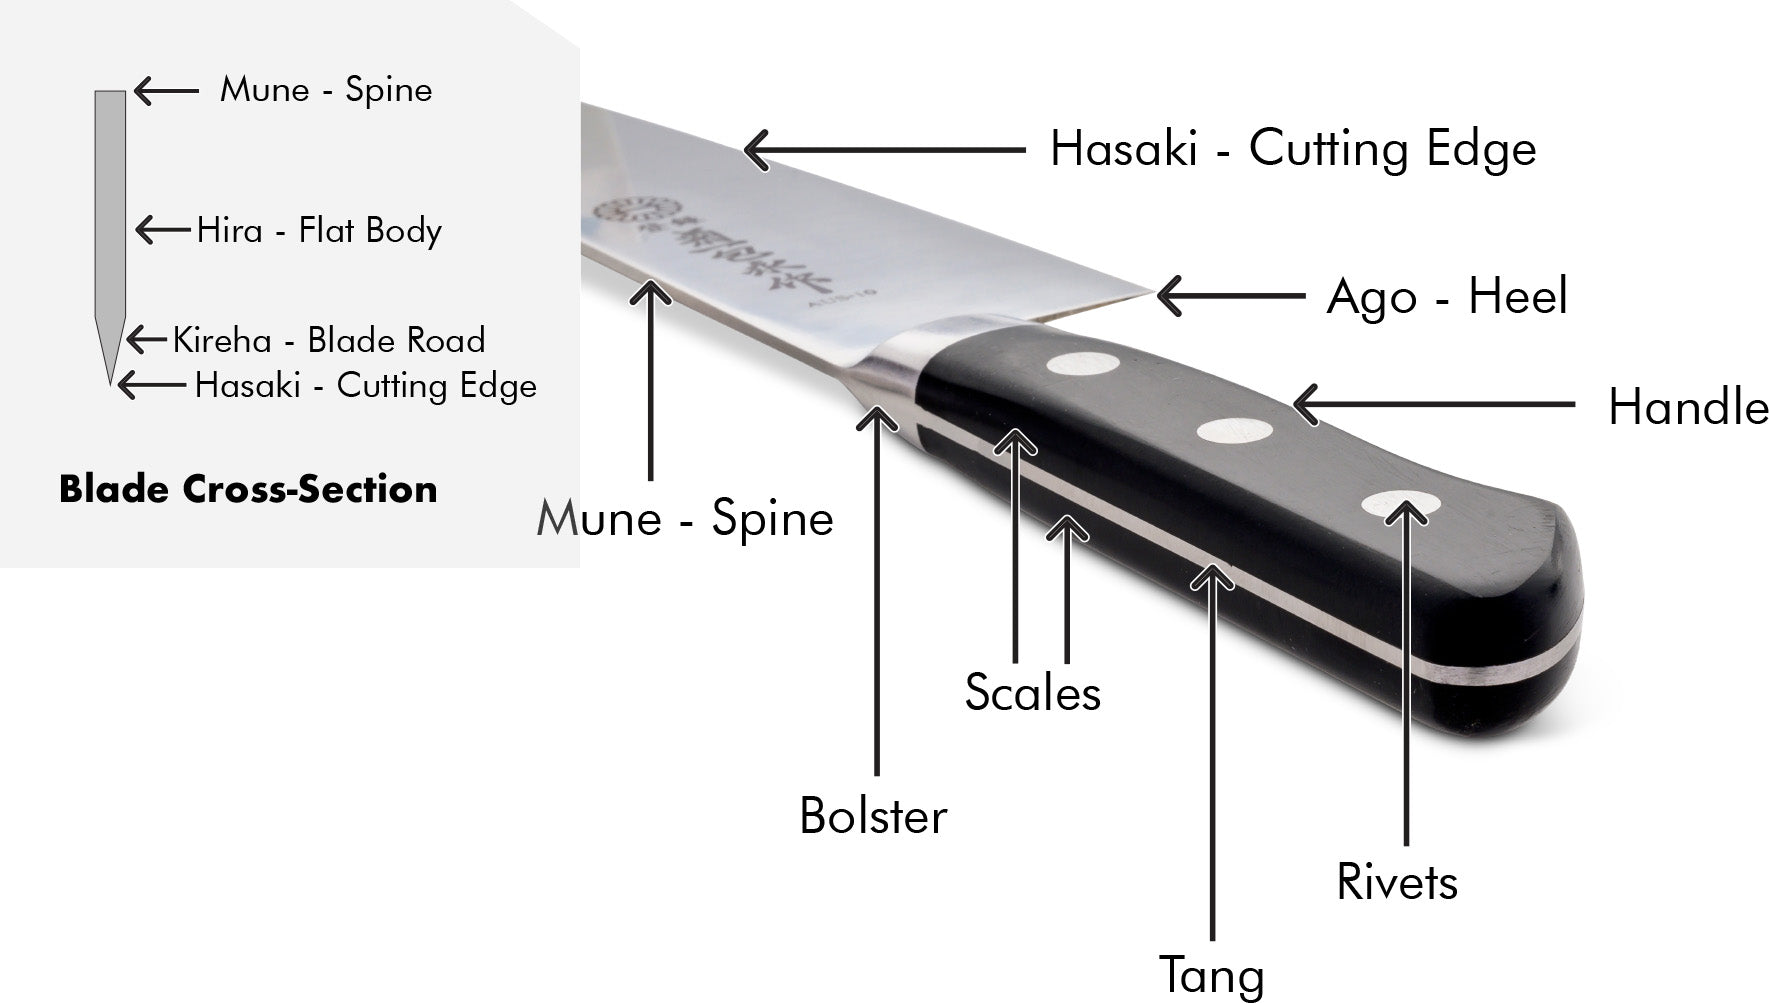 Japanese Double-Bevel Western Handle Knife Anatomy Perspective Diagram